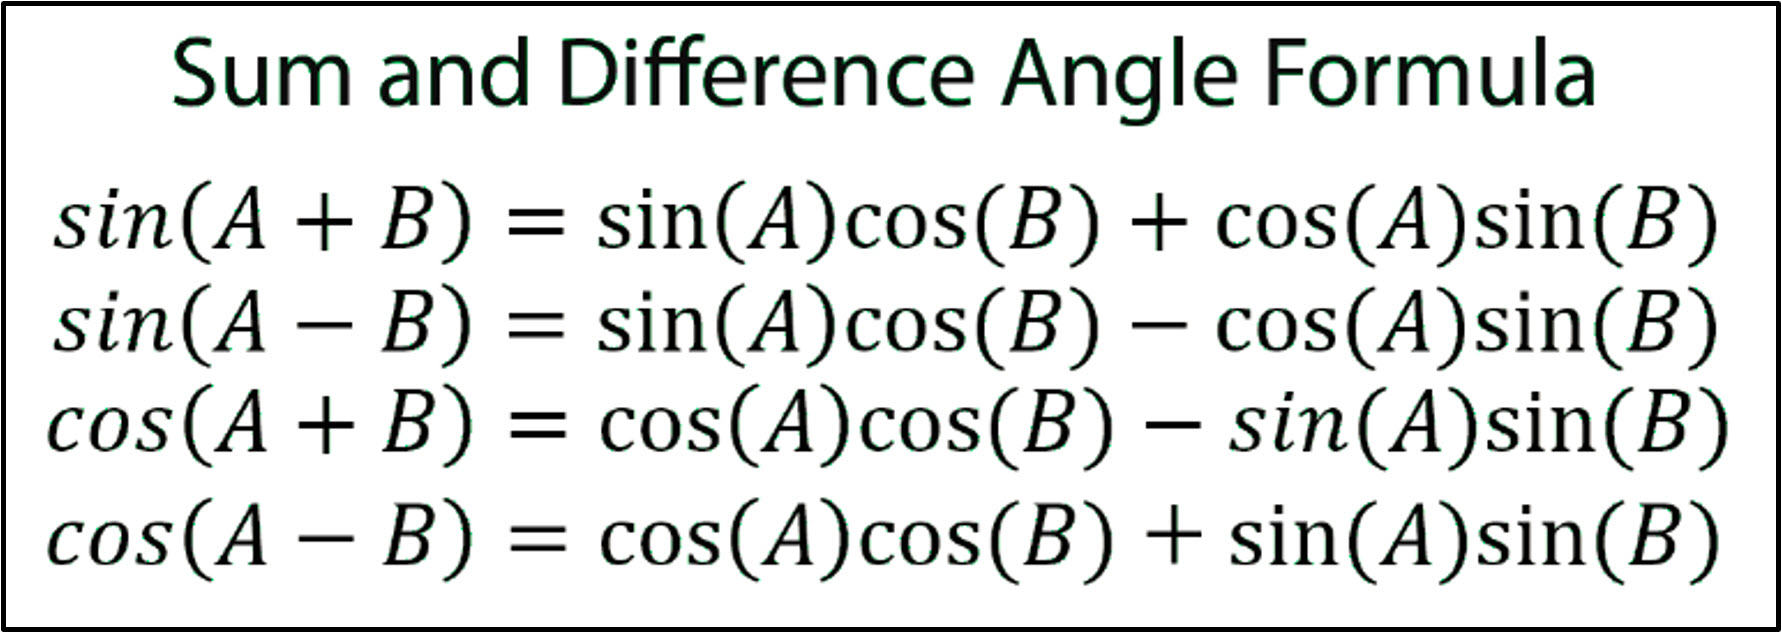 Notes for Sum and Difference Angle Formula